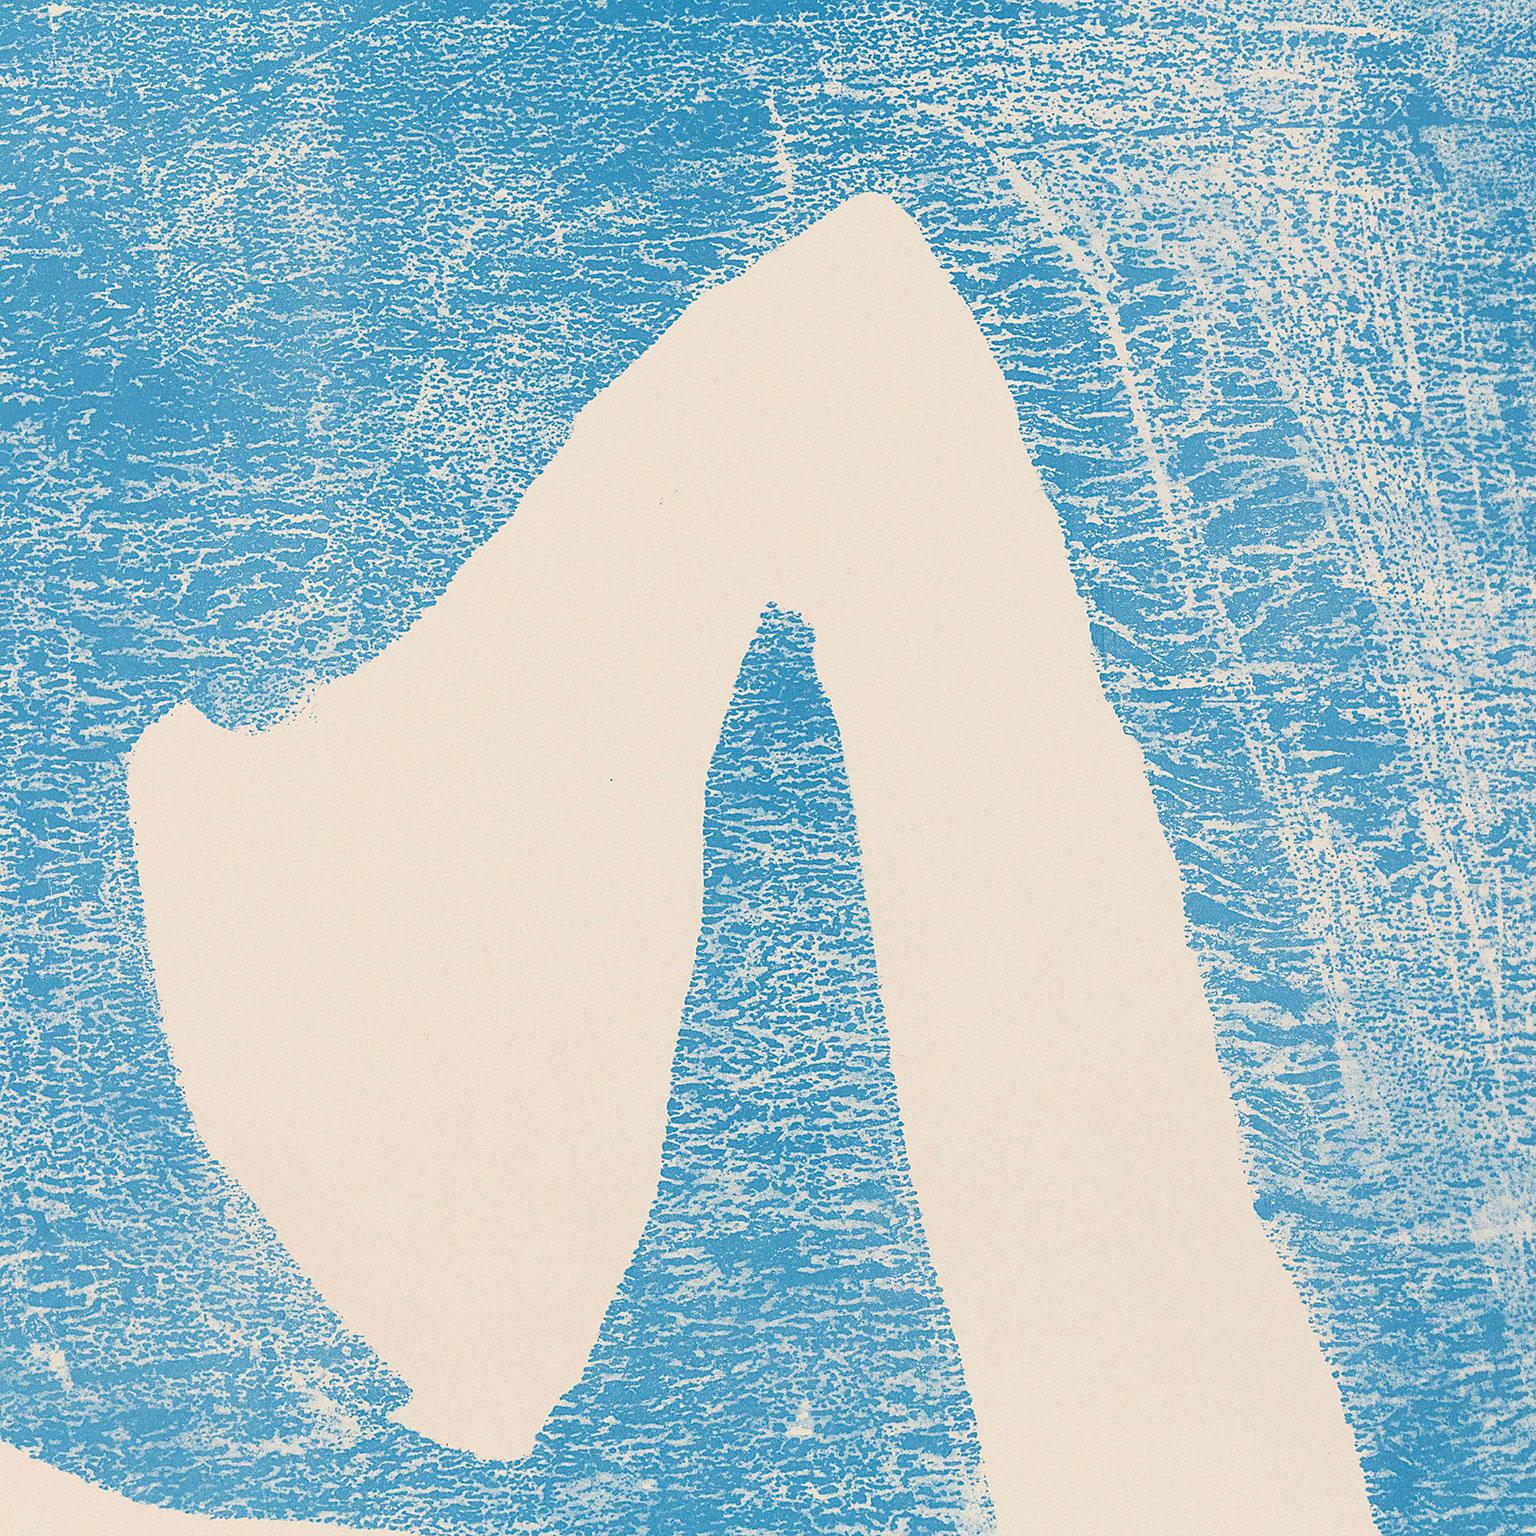 Summertime in Italy (Blue) - Abstract Expressionist Painting by Robert Motherwell